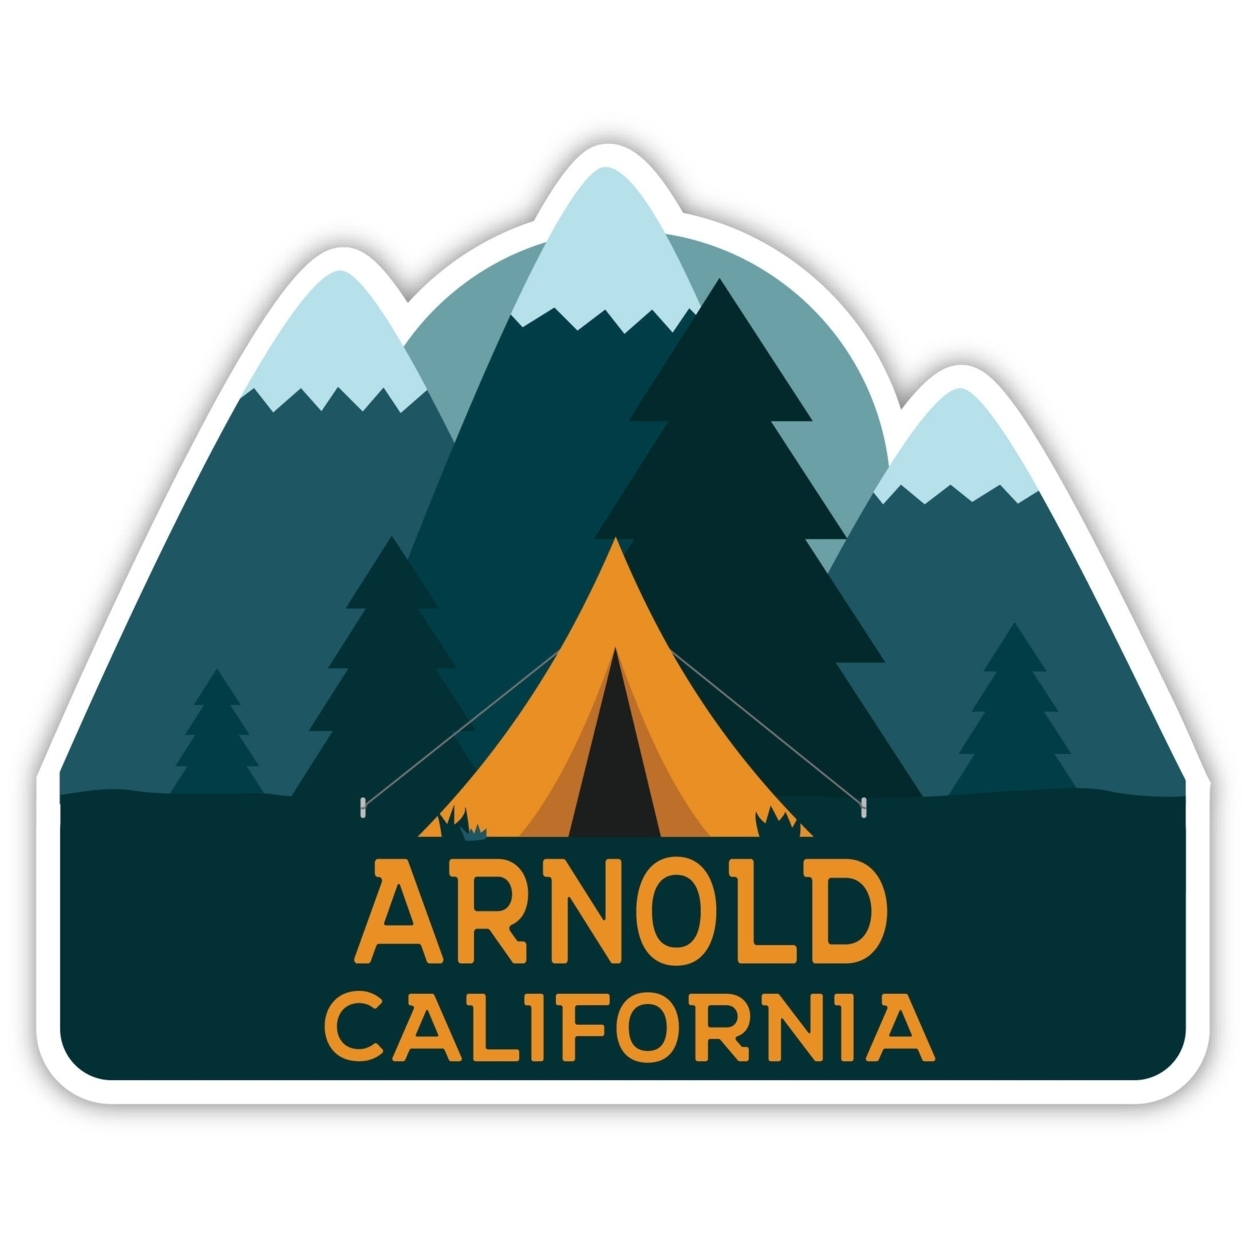 Arnold California Souvenir Decorative Stickers (Choose Theme And Size) - 4-Pack, 2-Inch, Tent